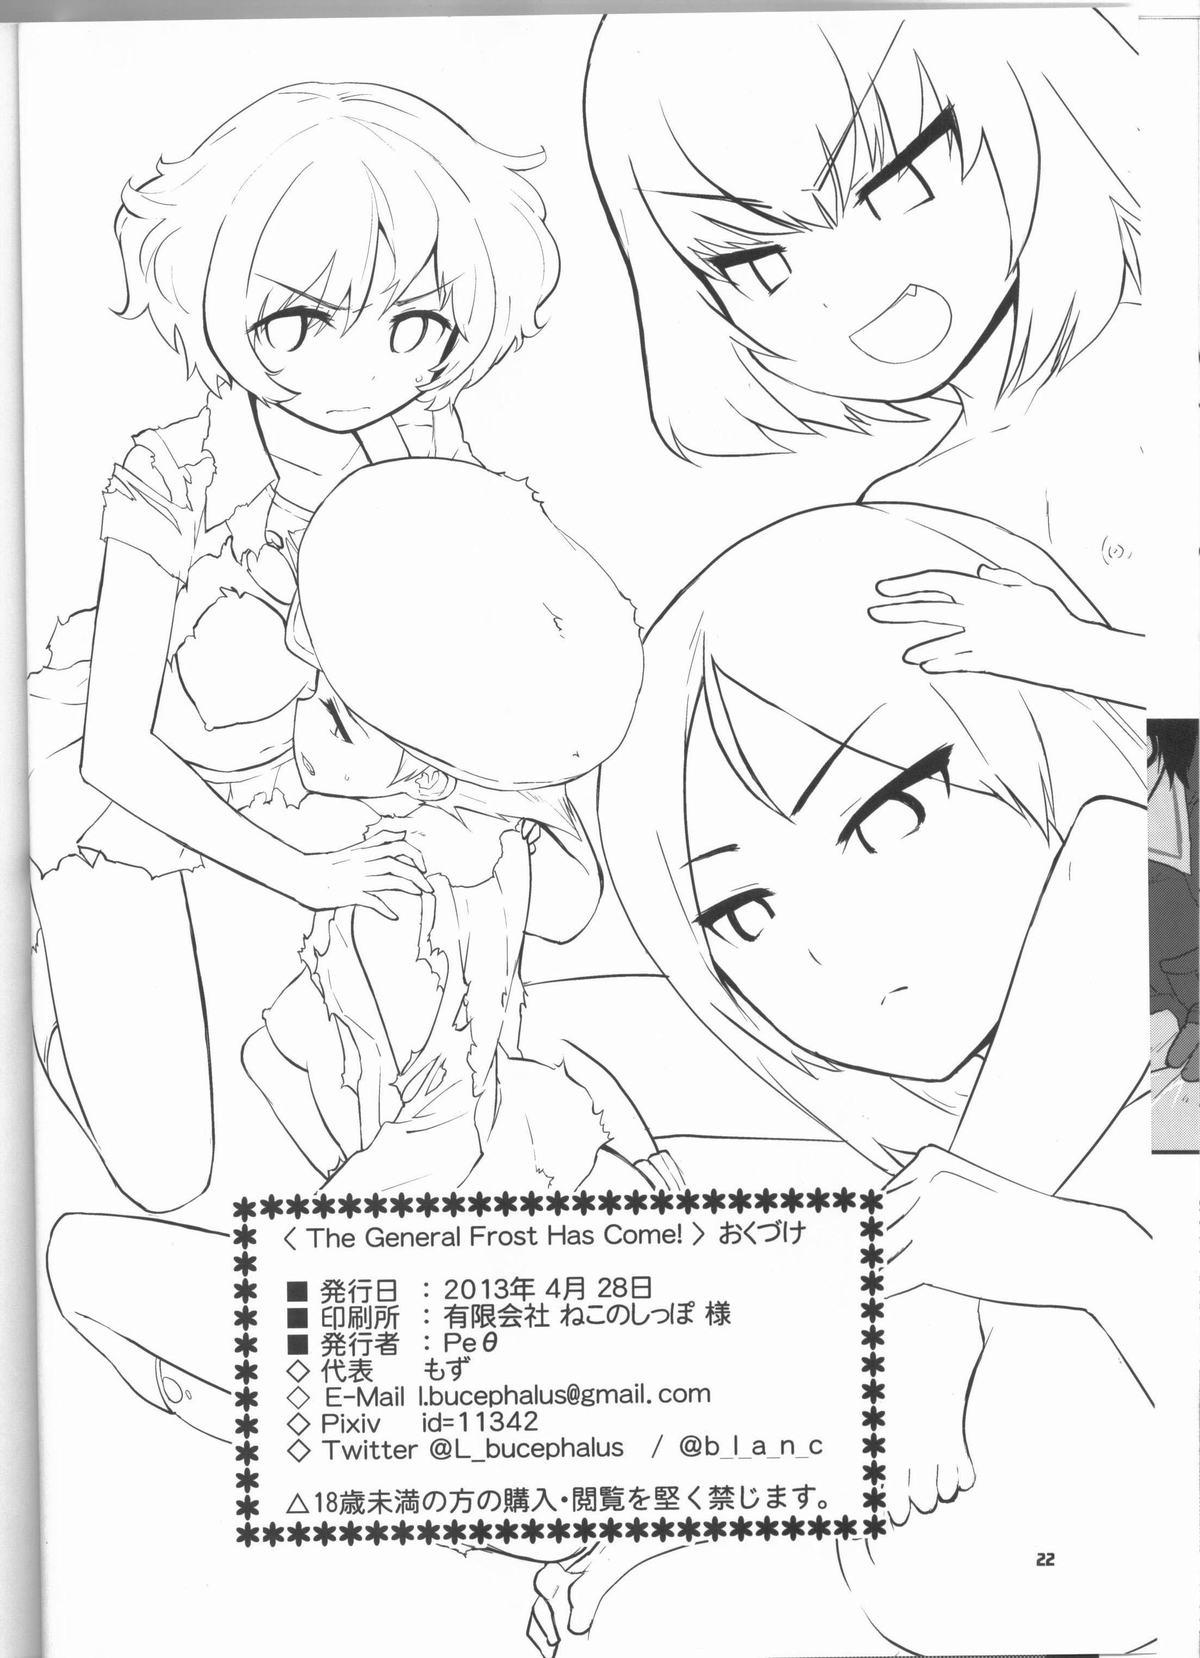 Twink The General Frost Has Come! - Girls und panzer Real Amature Porn - Page 21